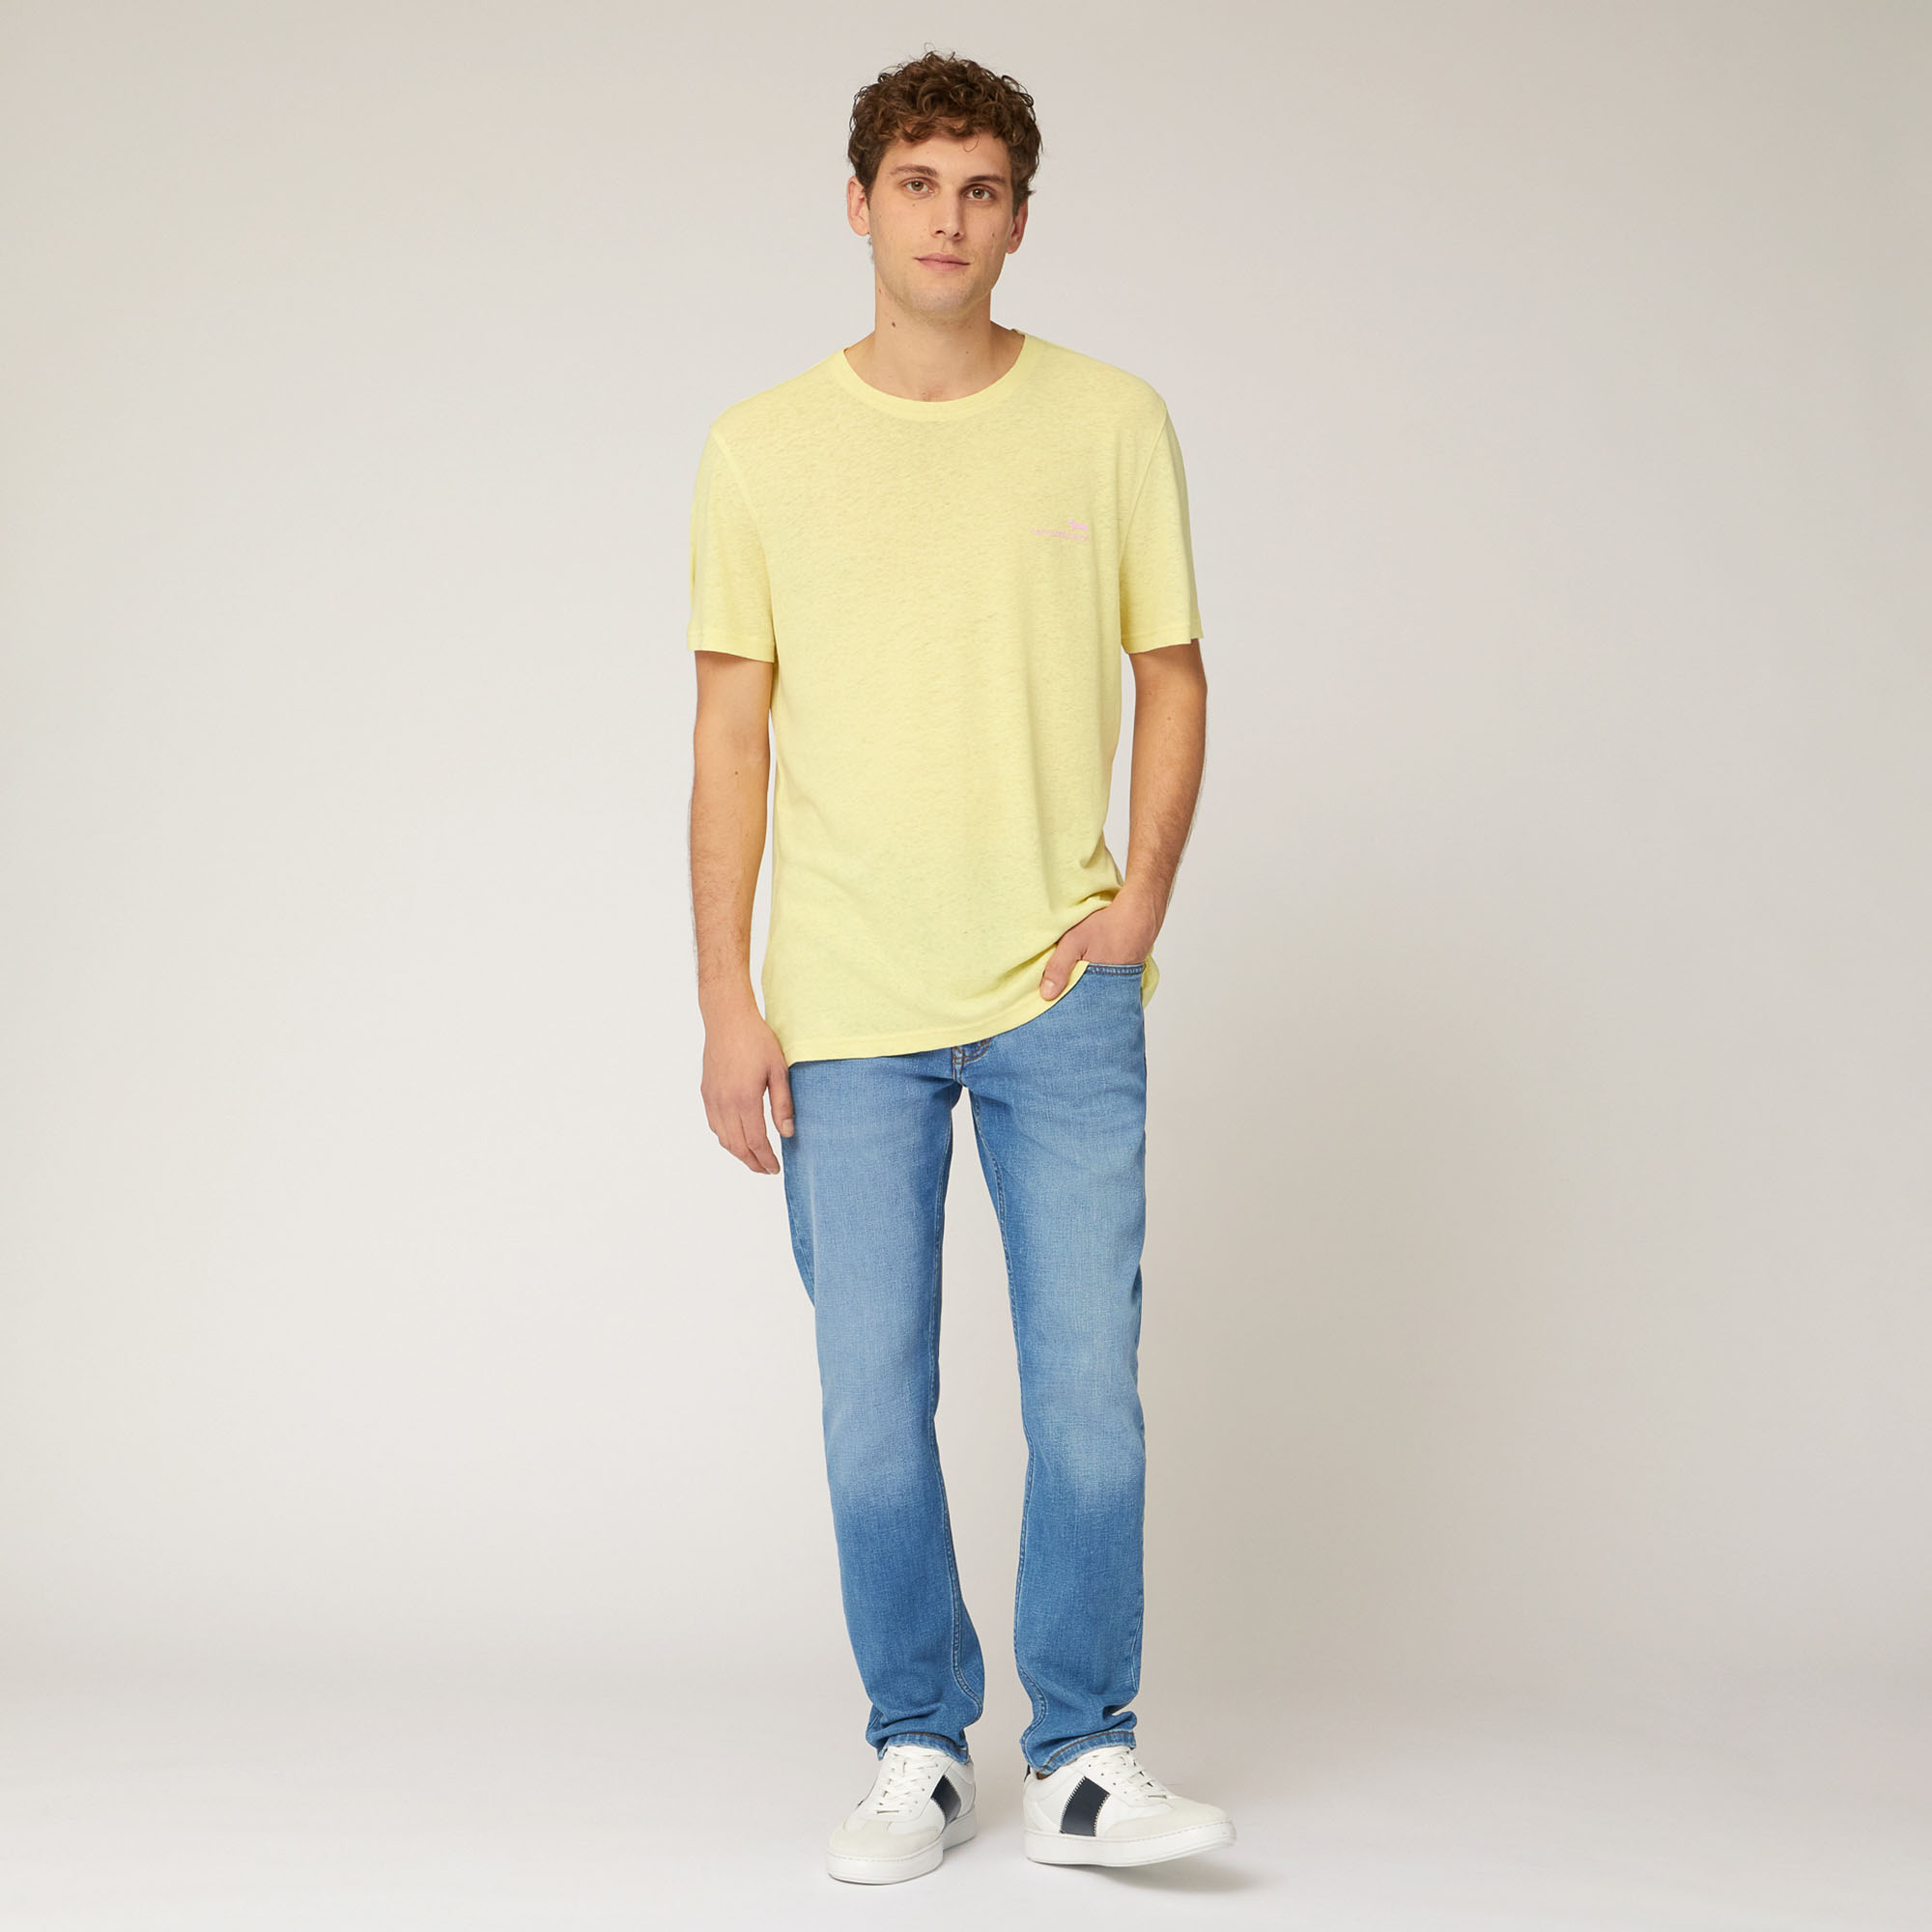 Linen and Cotton T-Shirt in Light Yellow: Luxury Italian T-Shirts ...